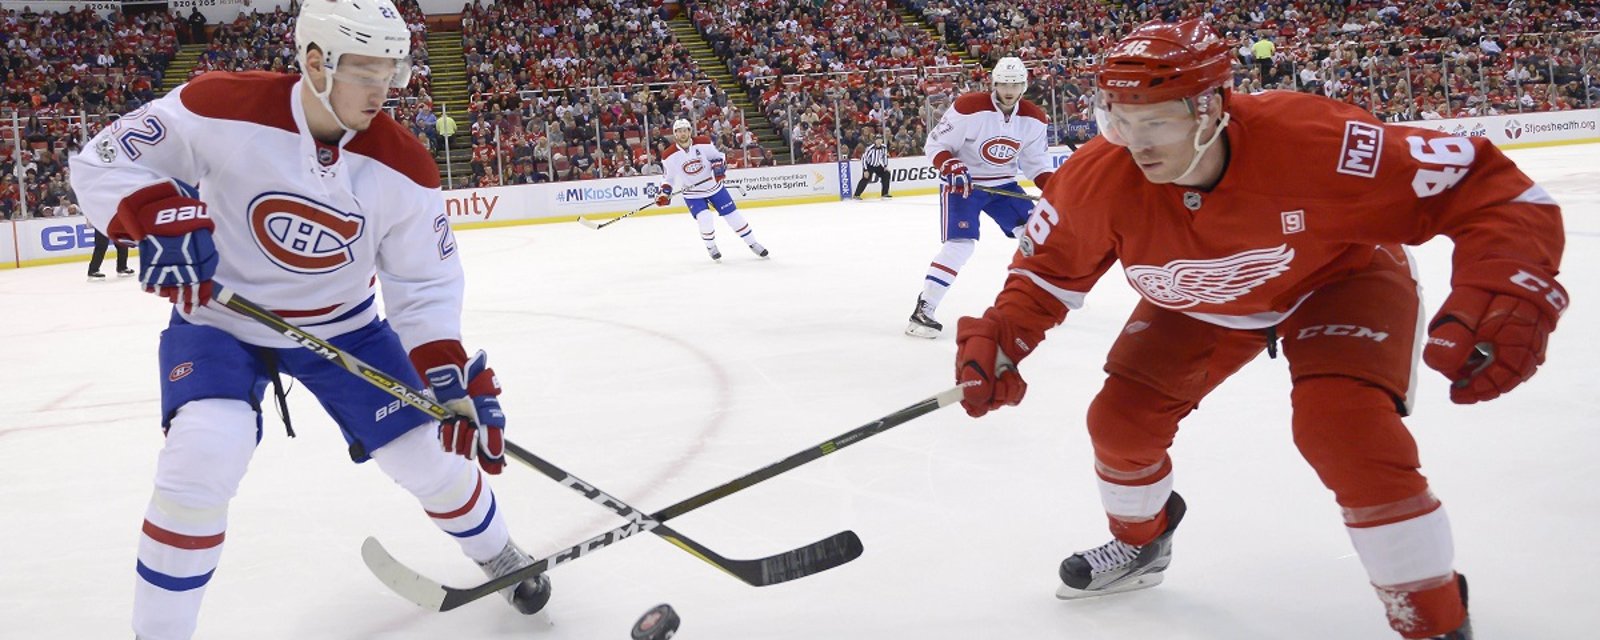 Former Habs defenseman appears to call out his old team after being traded.